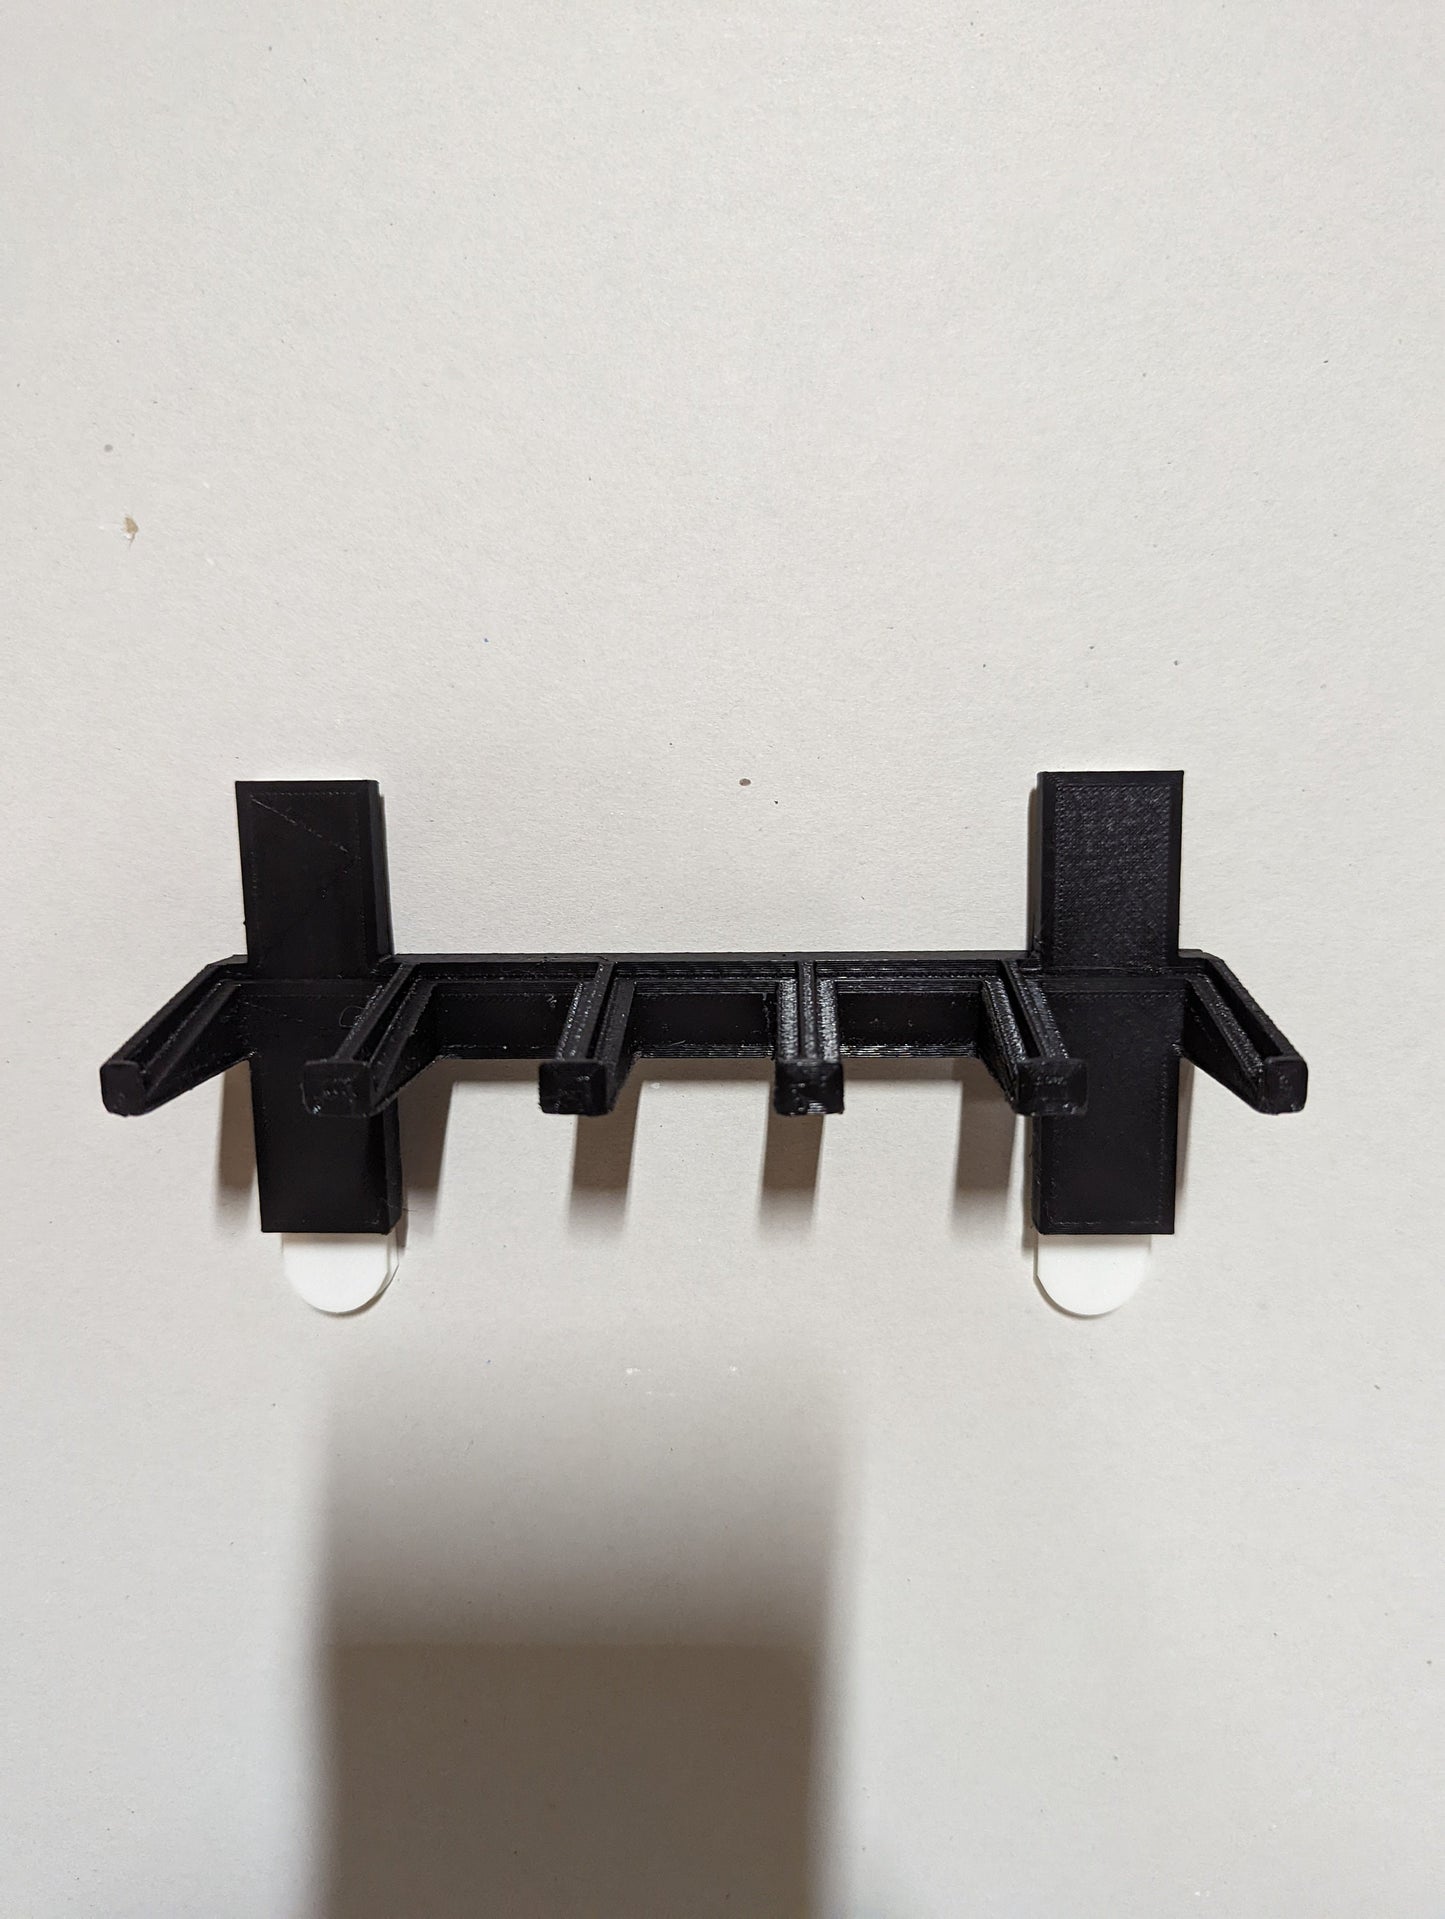 Mount for Glock 9mm/357/40 Mags - Command Strips | Magazine Holder Storage Rack